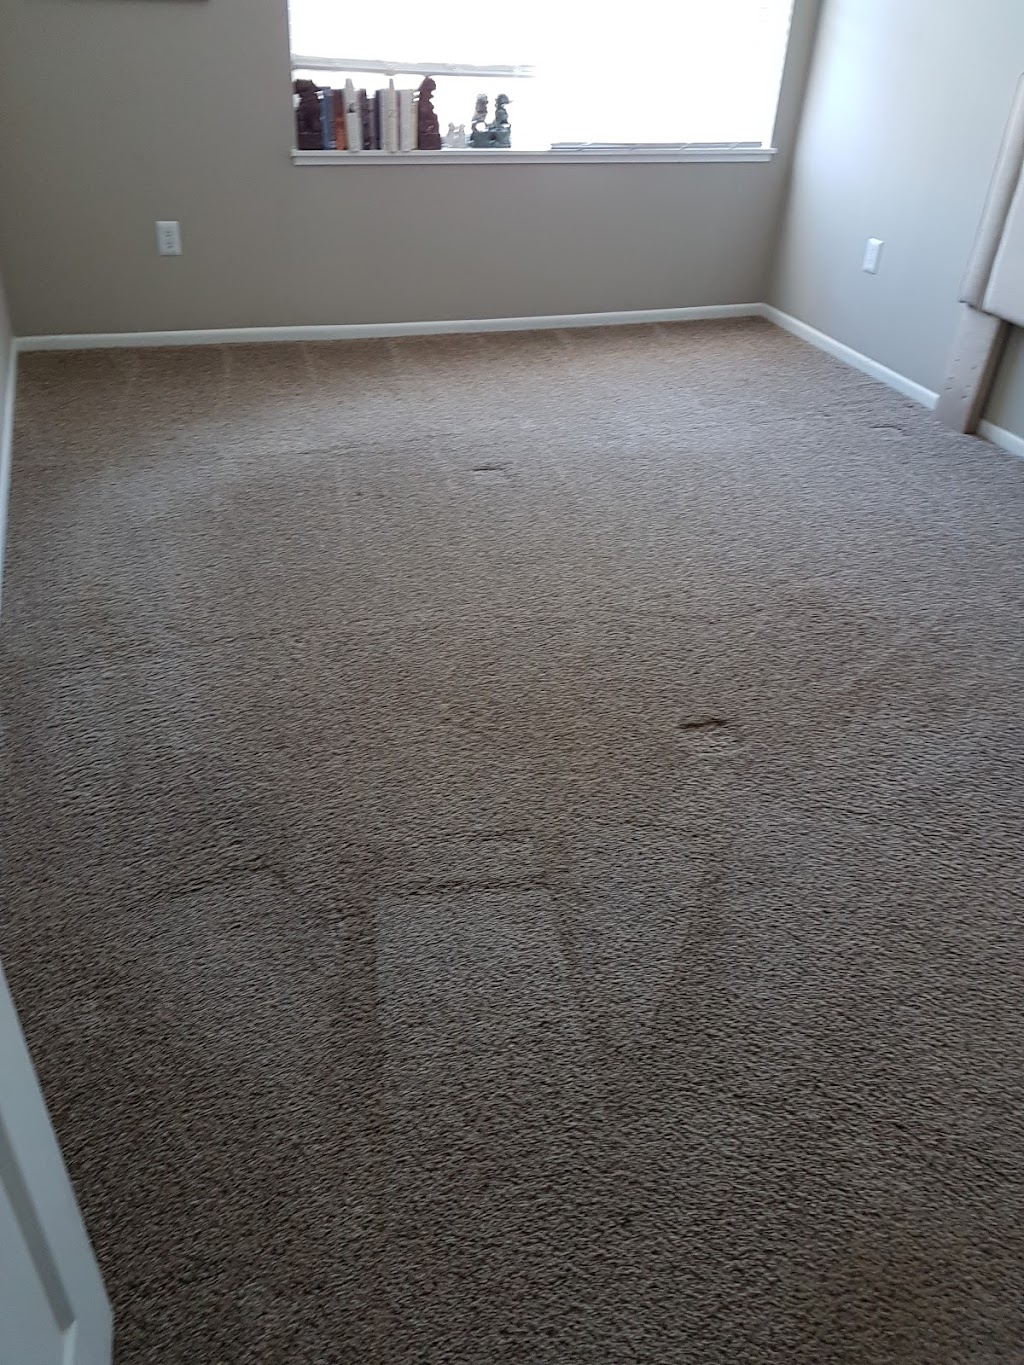 Crystal Clear Carpet Cleaning | 6385 Old Shady Oak Rd #250, Eden Prairie, MN 55344 | Phone: (612) 444-6231